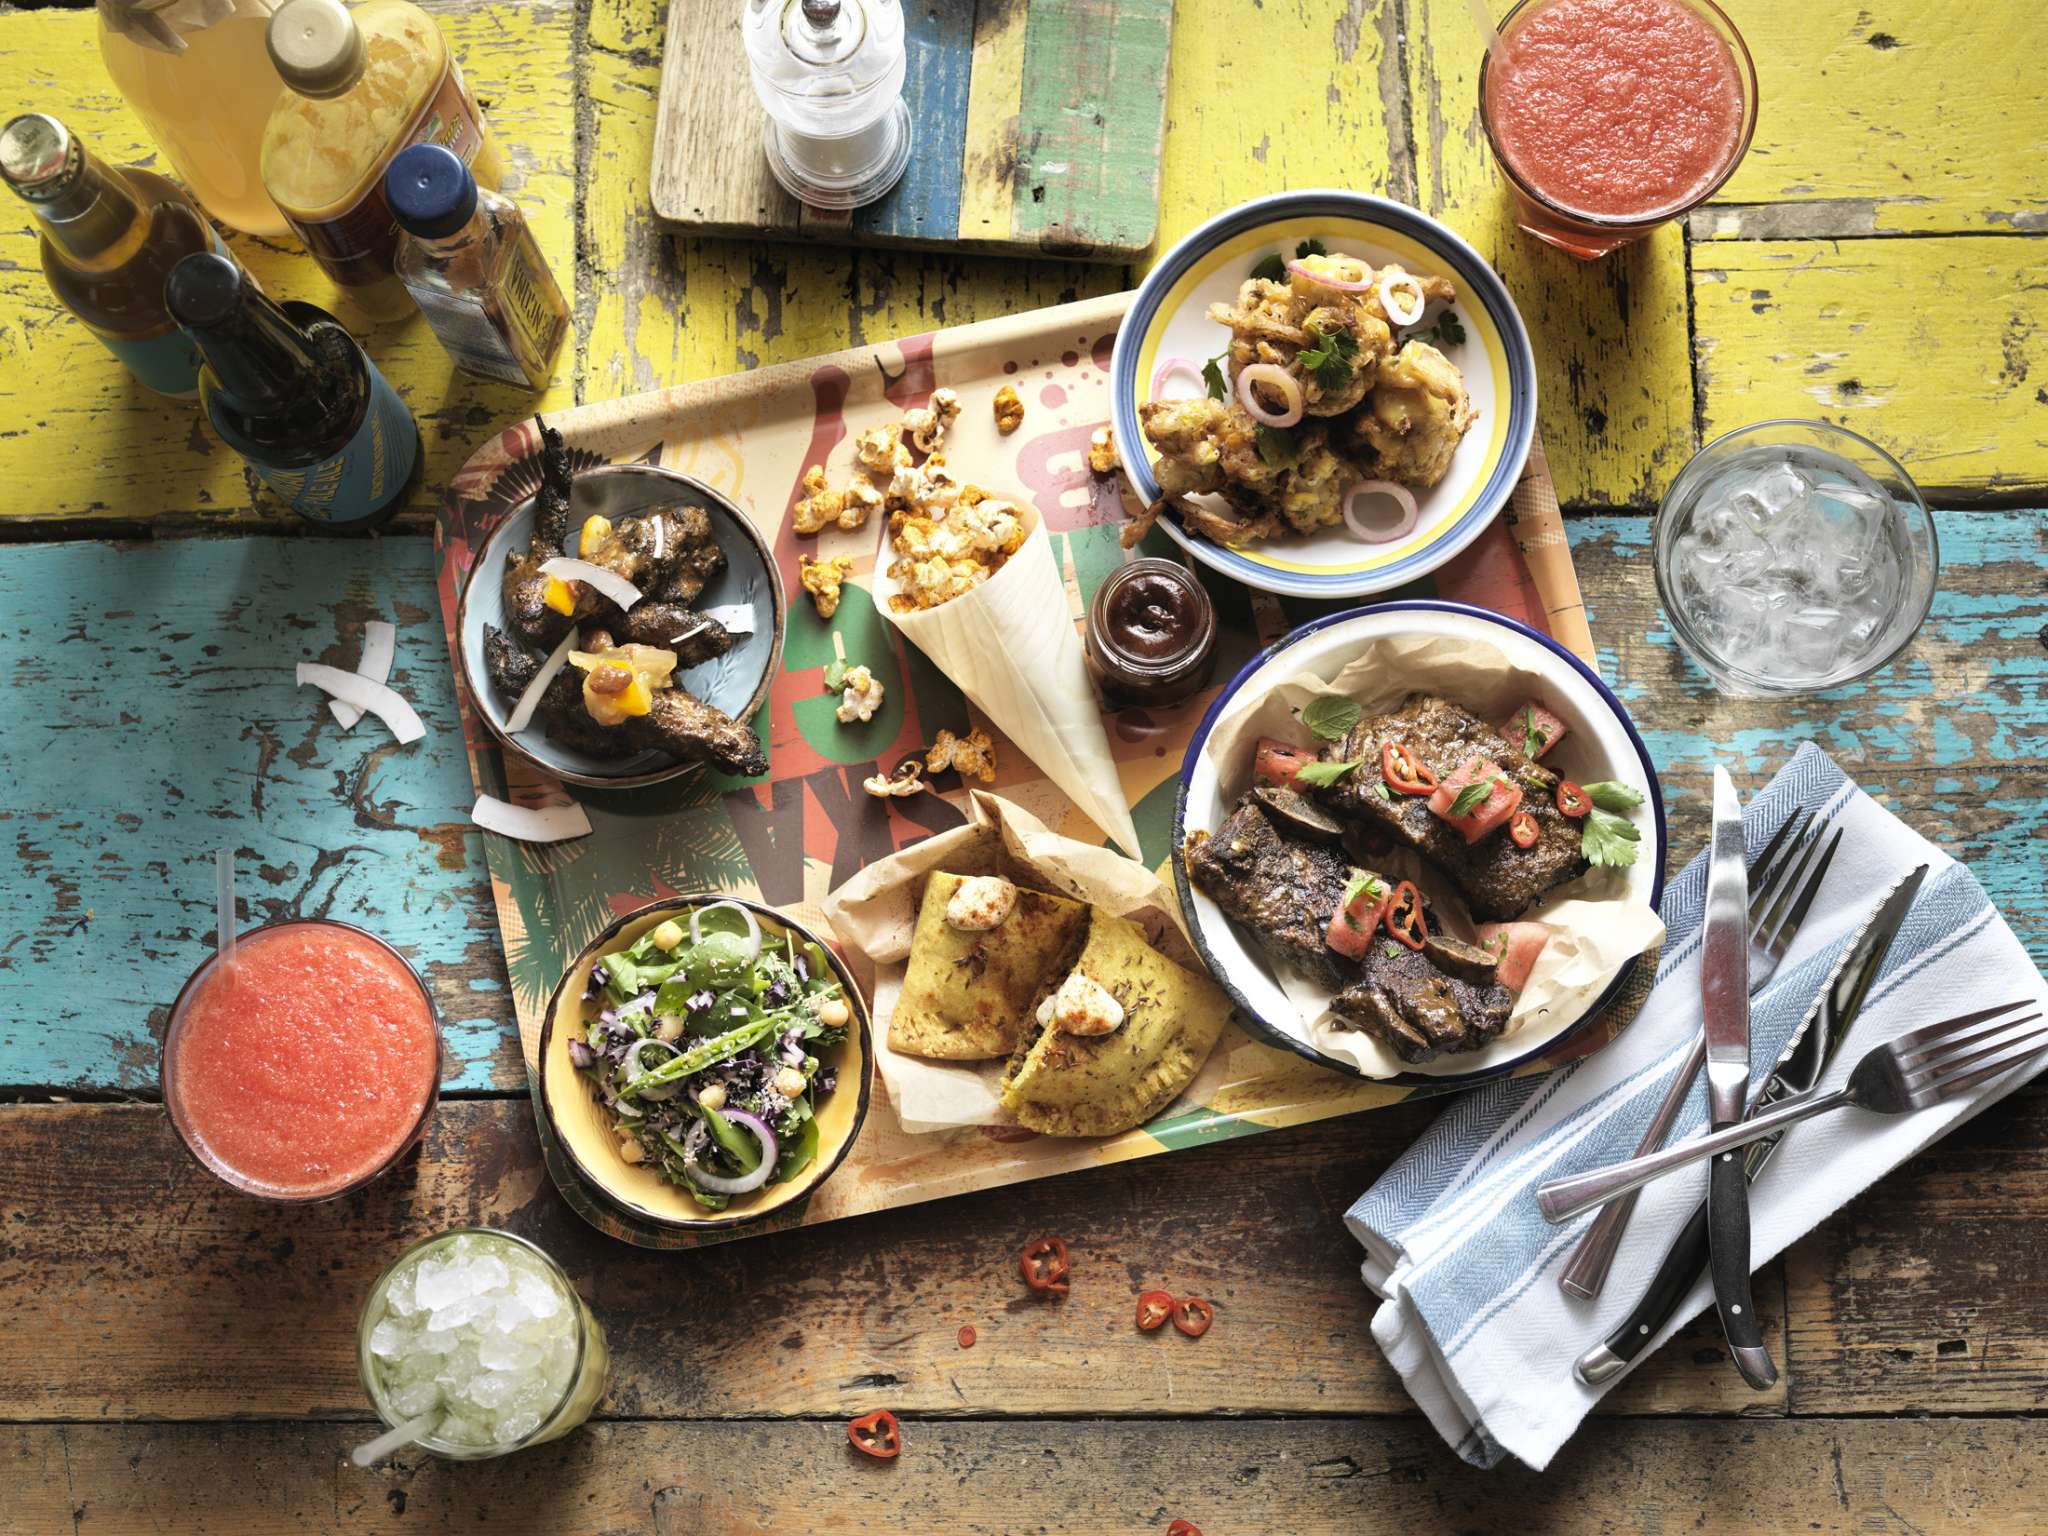 HAVE YOURSELF A CARIBBEAN CHRISTMAS AT TURTLE BAY